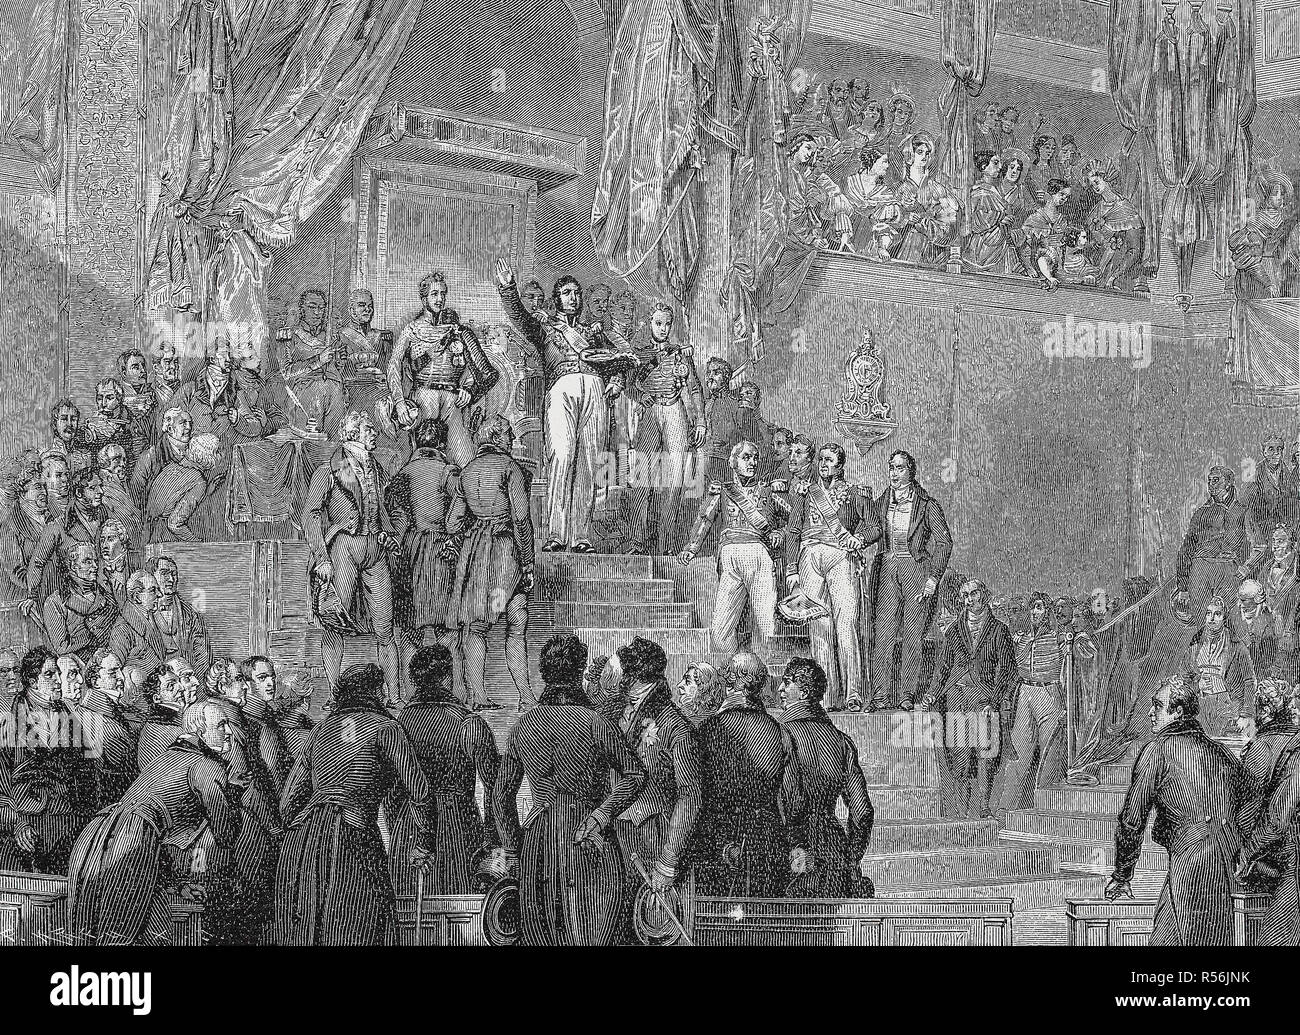 The July Revolution in Paris, Louis Philip makes an oath on August 9, 1830, painting by E. Deveria in the National Gallery of Stock Photo